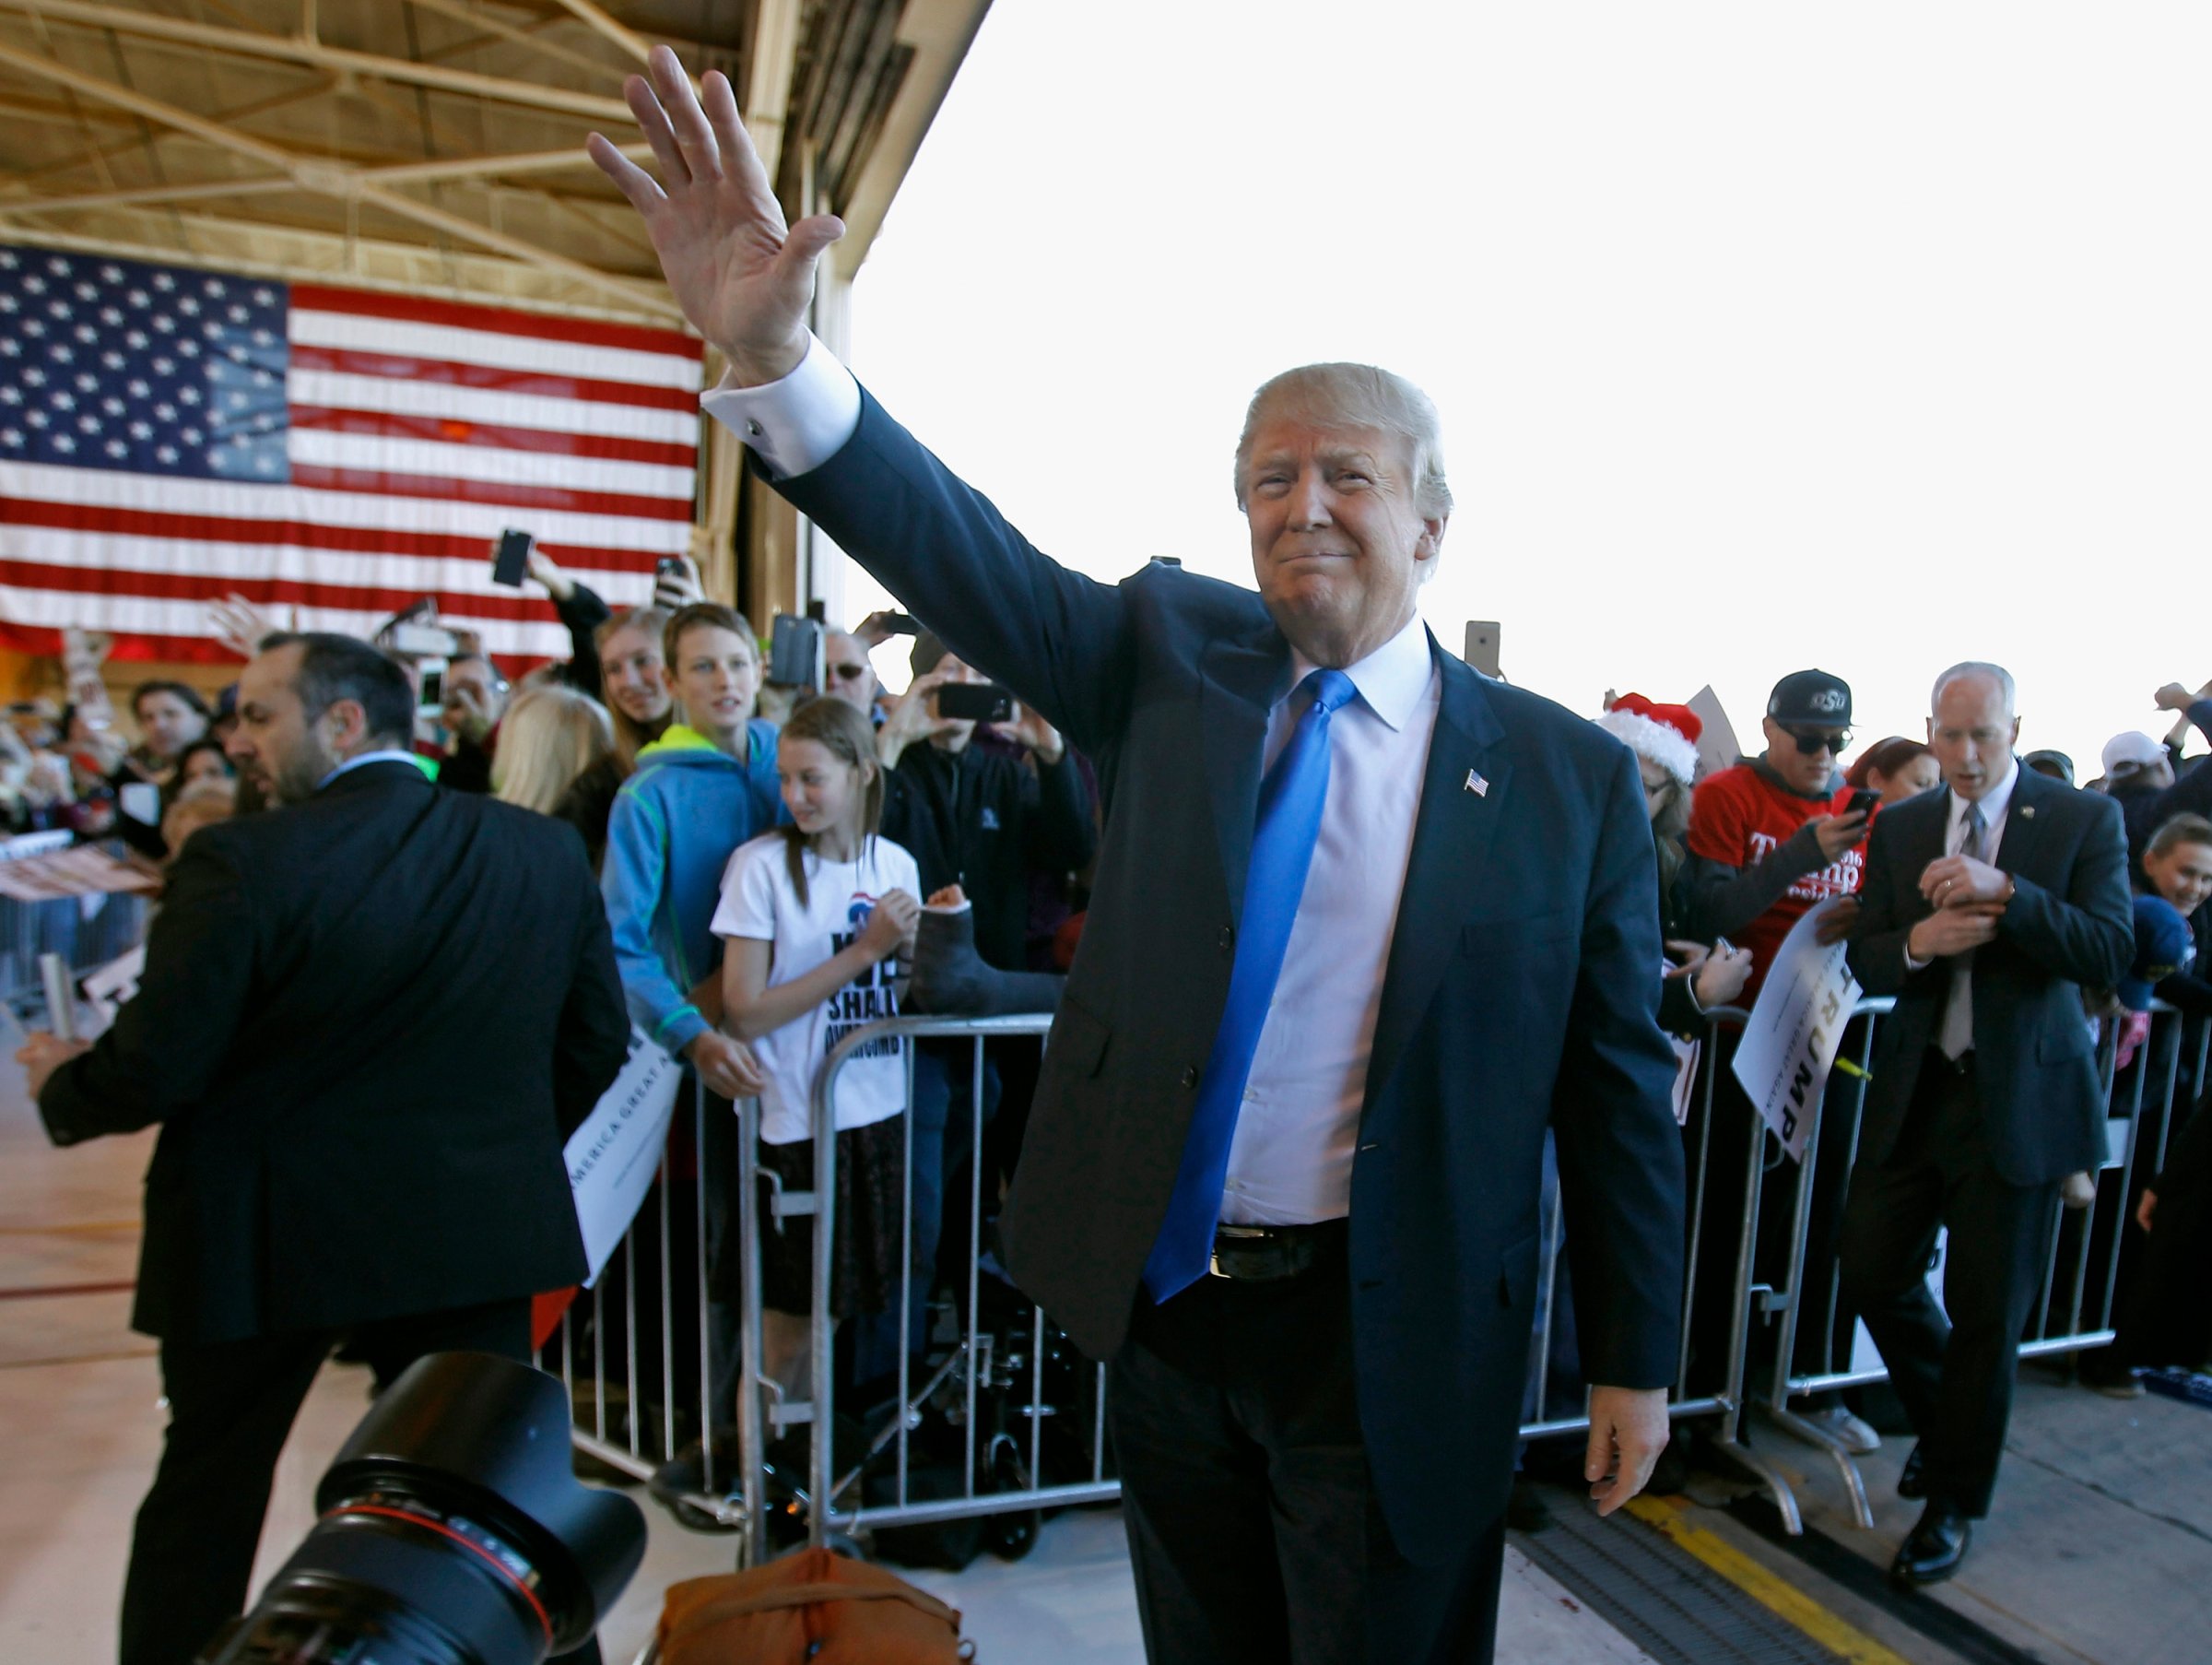 Donald Trump waves to the crowd as he arrives at a campaign event at the International Air Response facility on Dec. 16 in Mesa, Arizona.